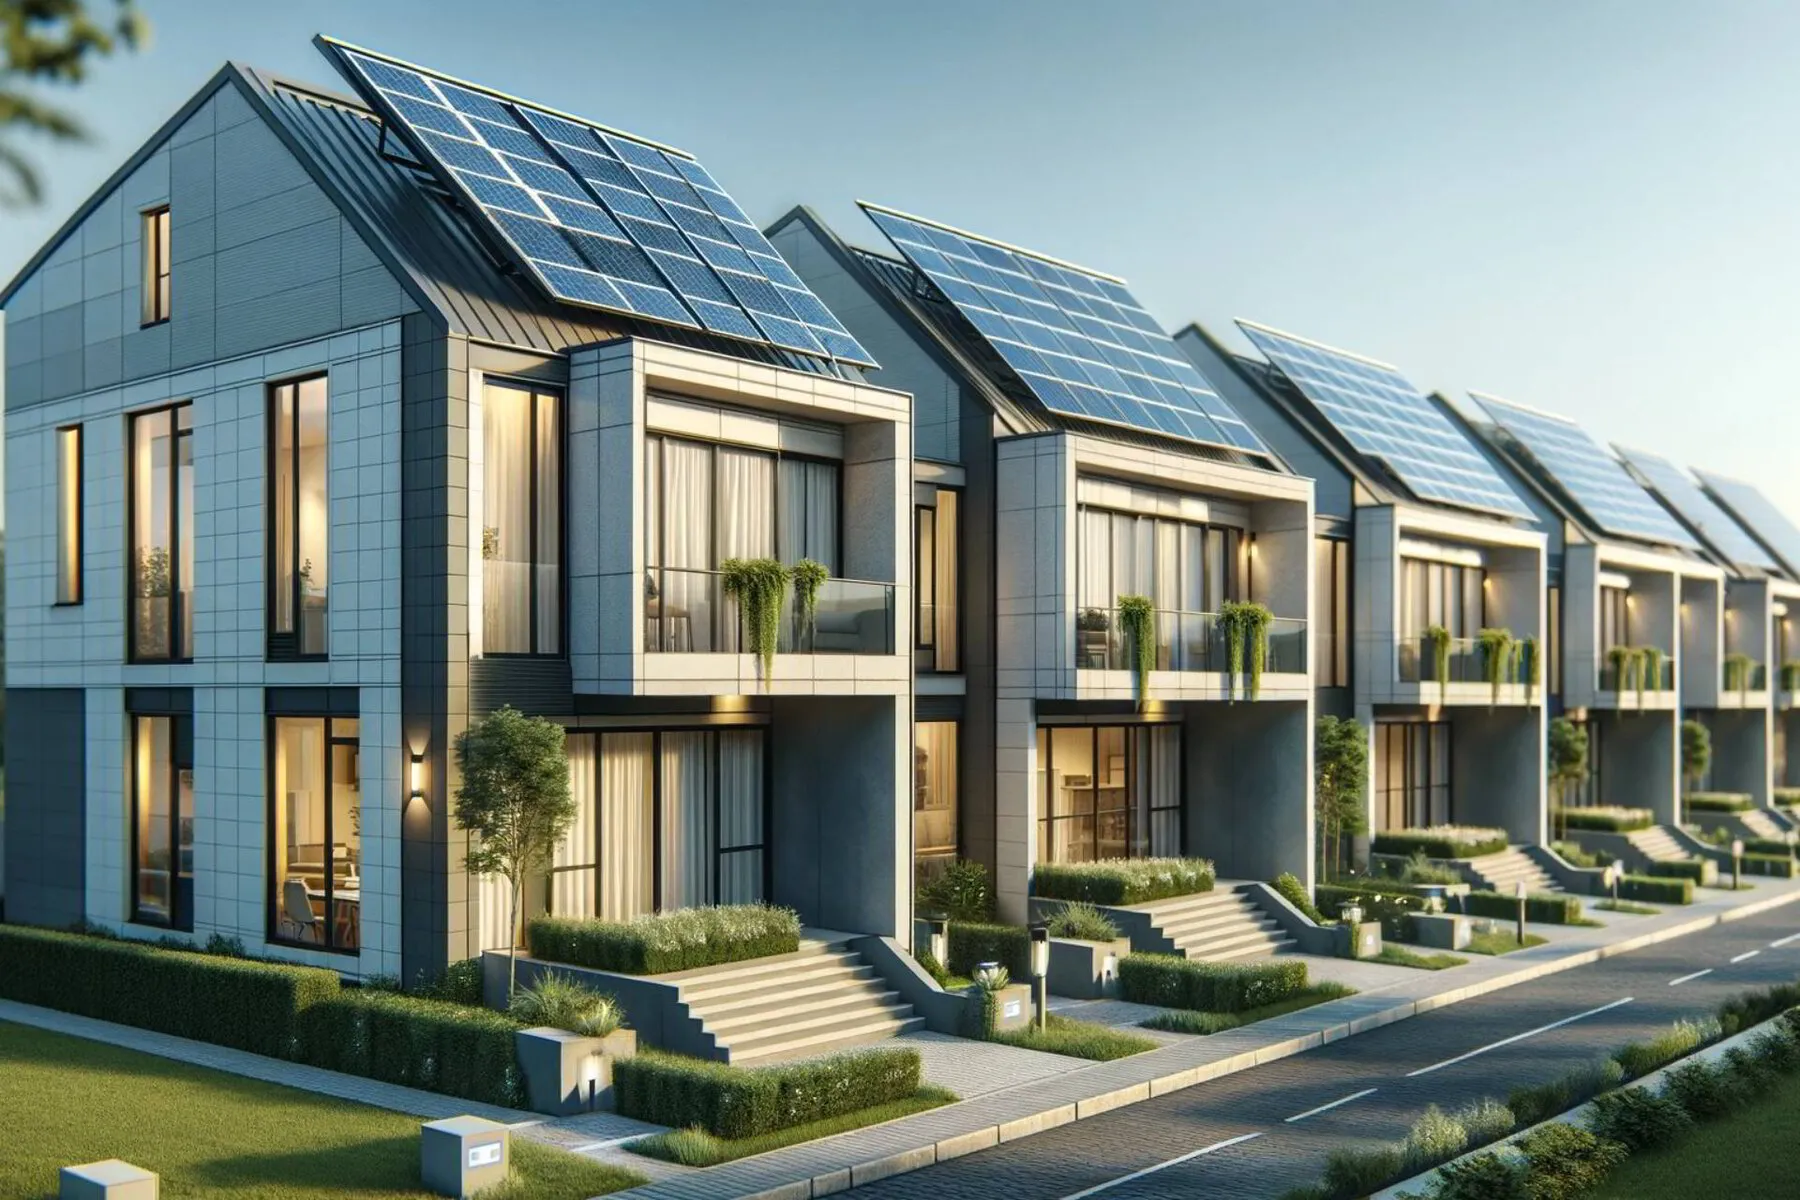 DALL·E 2023-12-10 10.32.53 - A photorealistic 16_9 image of a row of modern townhouses, each equipped with solar panels on their roofs. The townhouses feature a contemporary archi